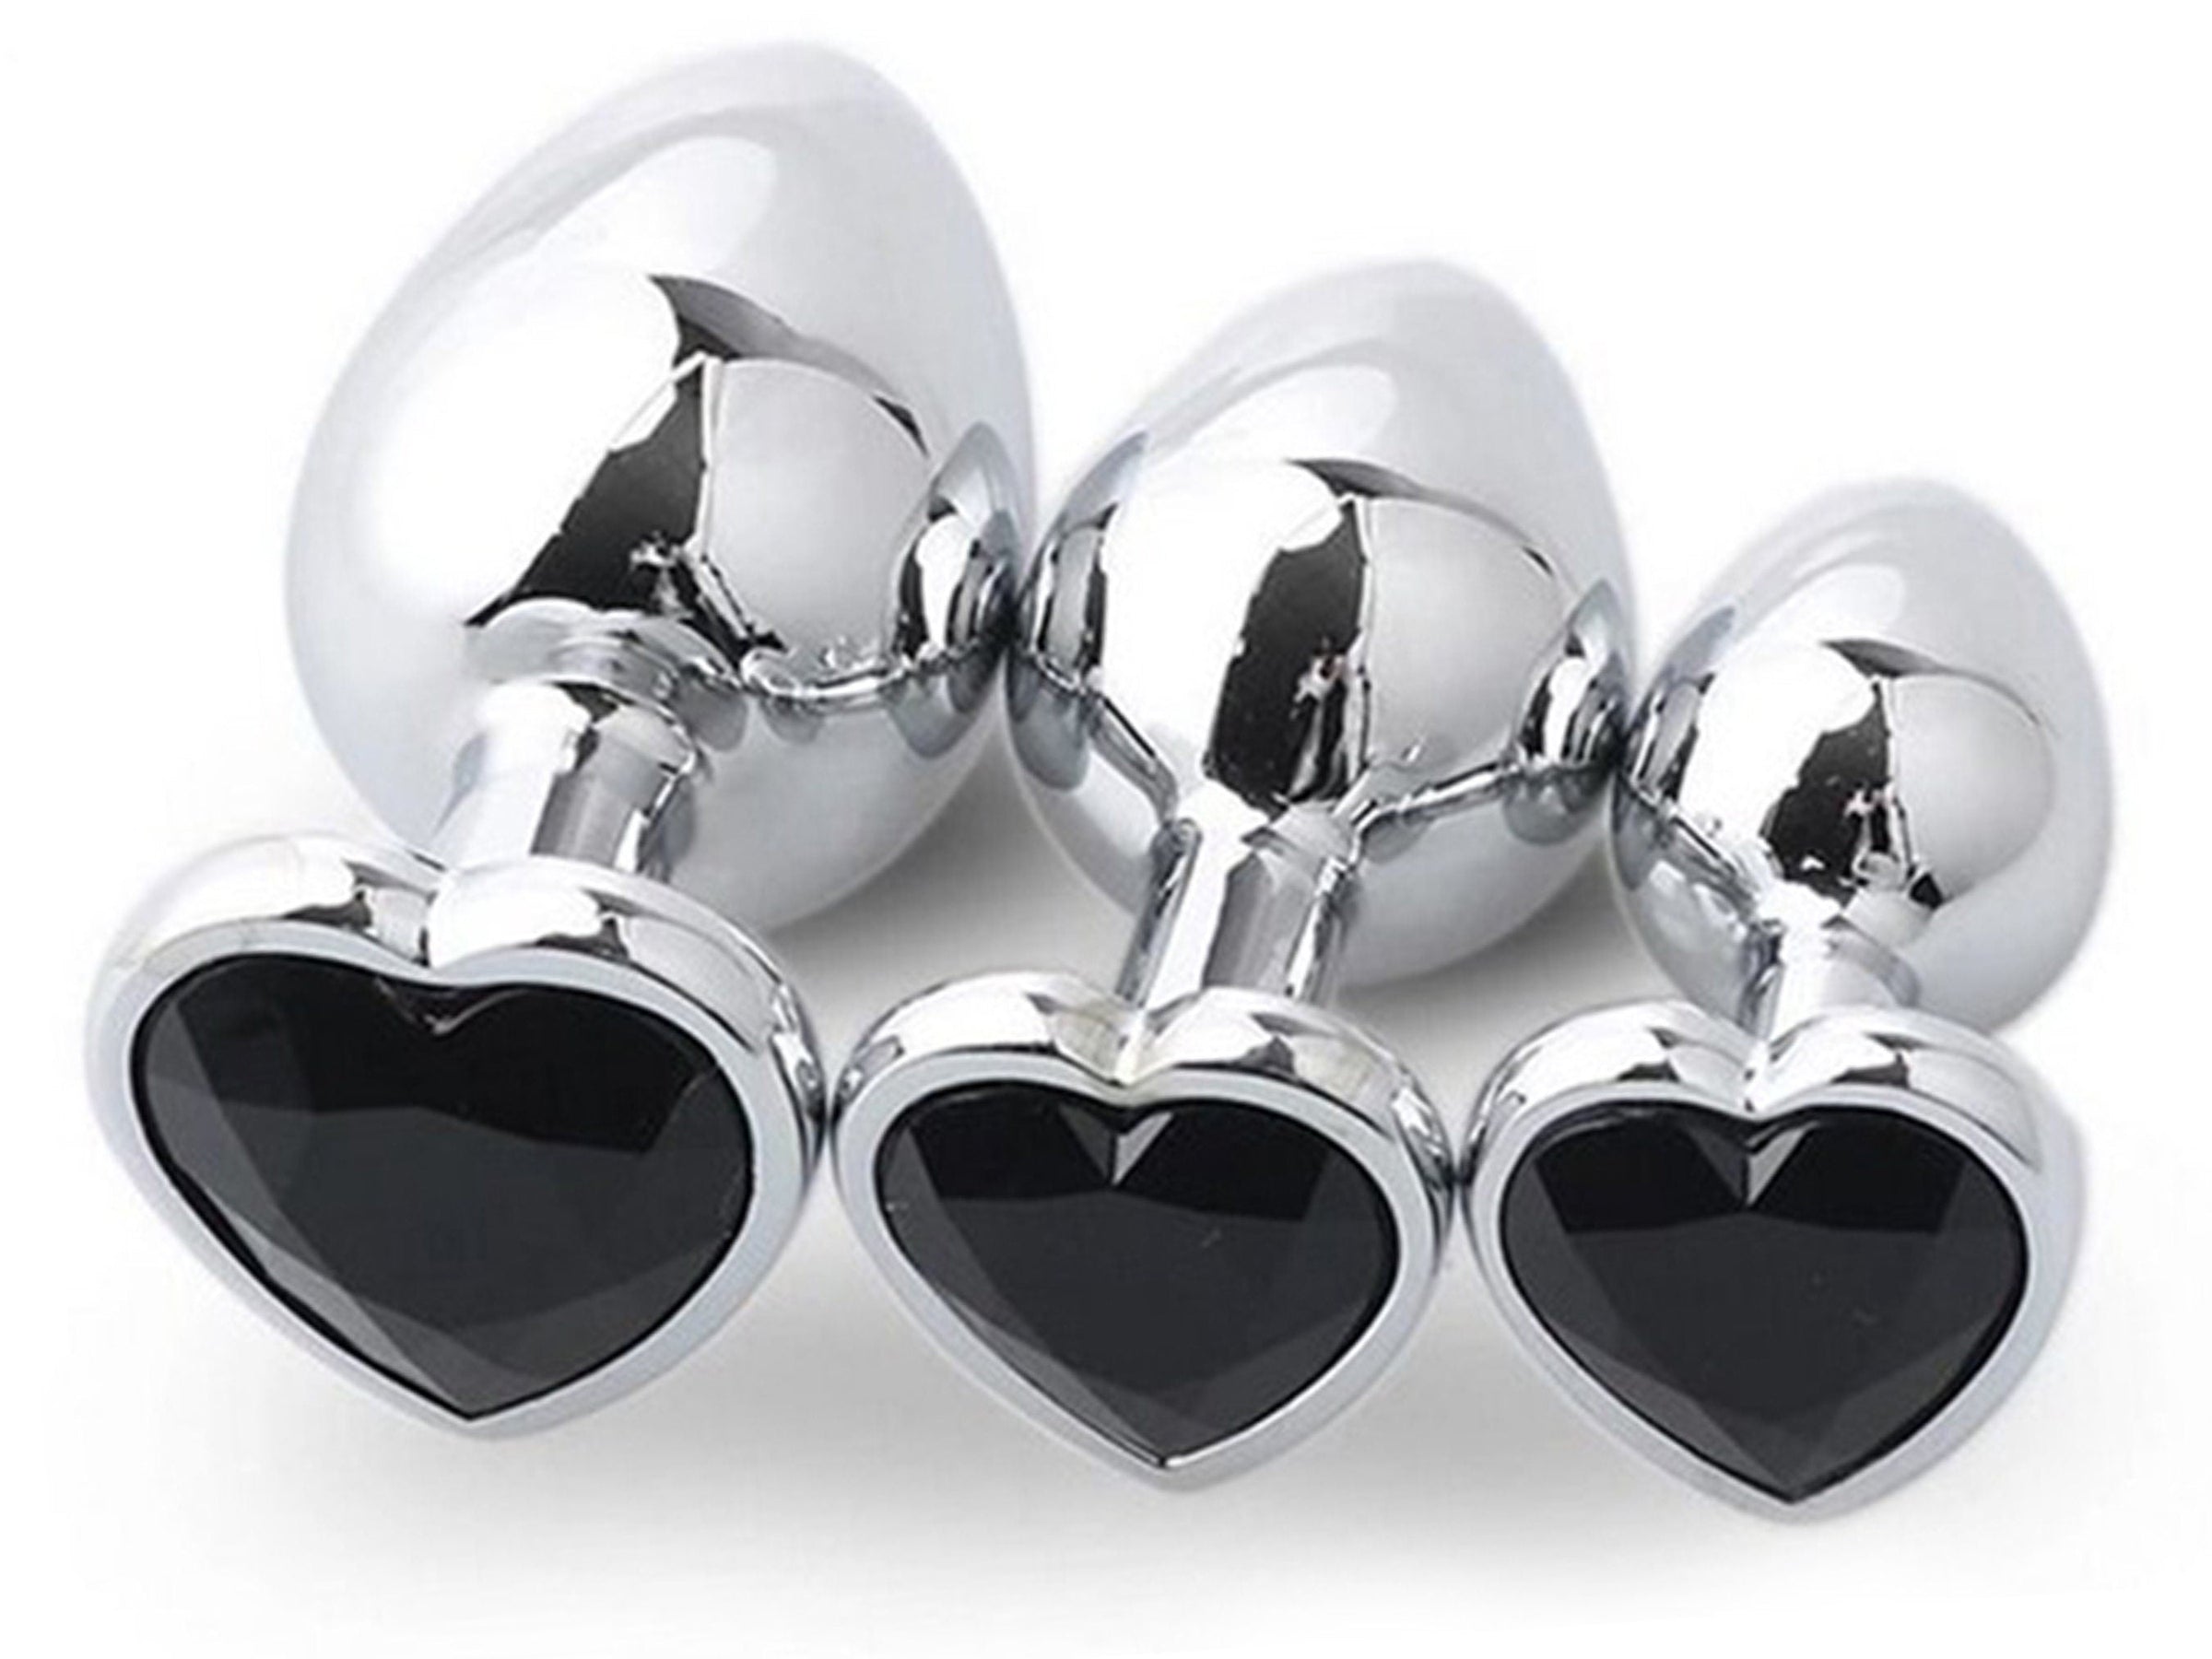 BLACK HEART Shaped Acrylic Crystal Butt plug 3 sizes anal toy sex jewe picture image